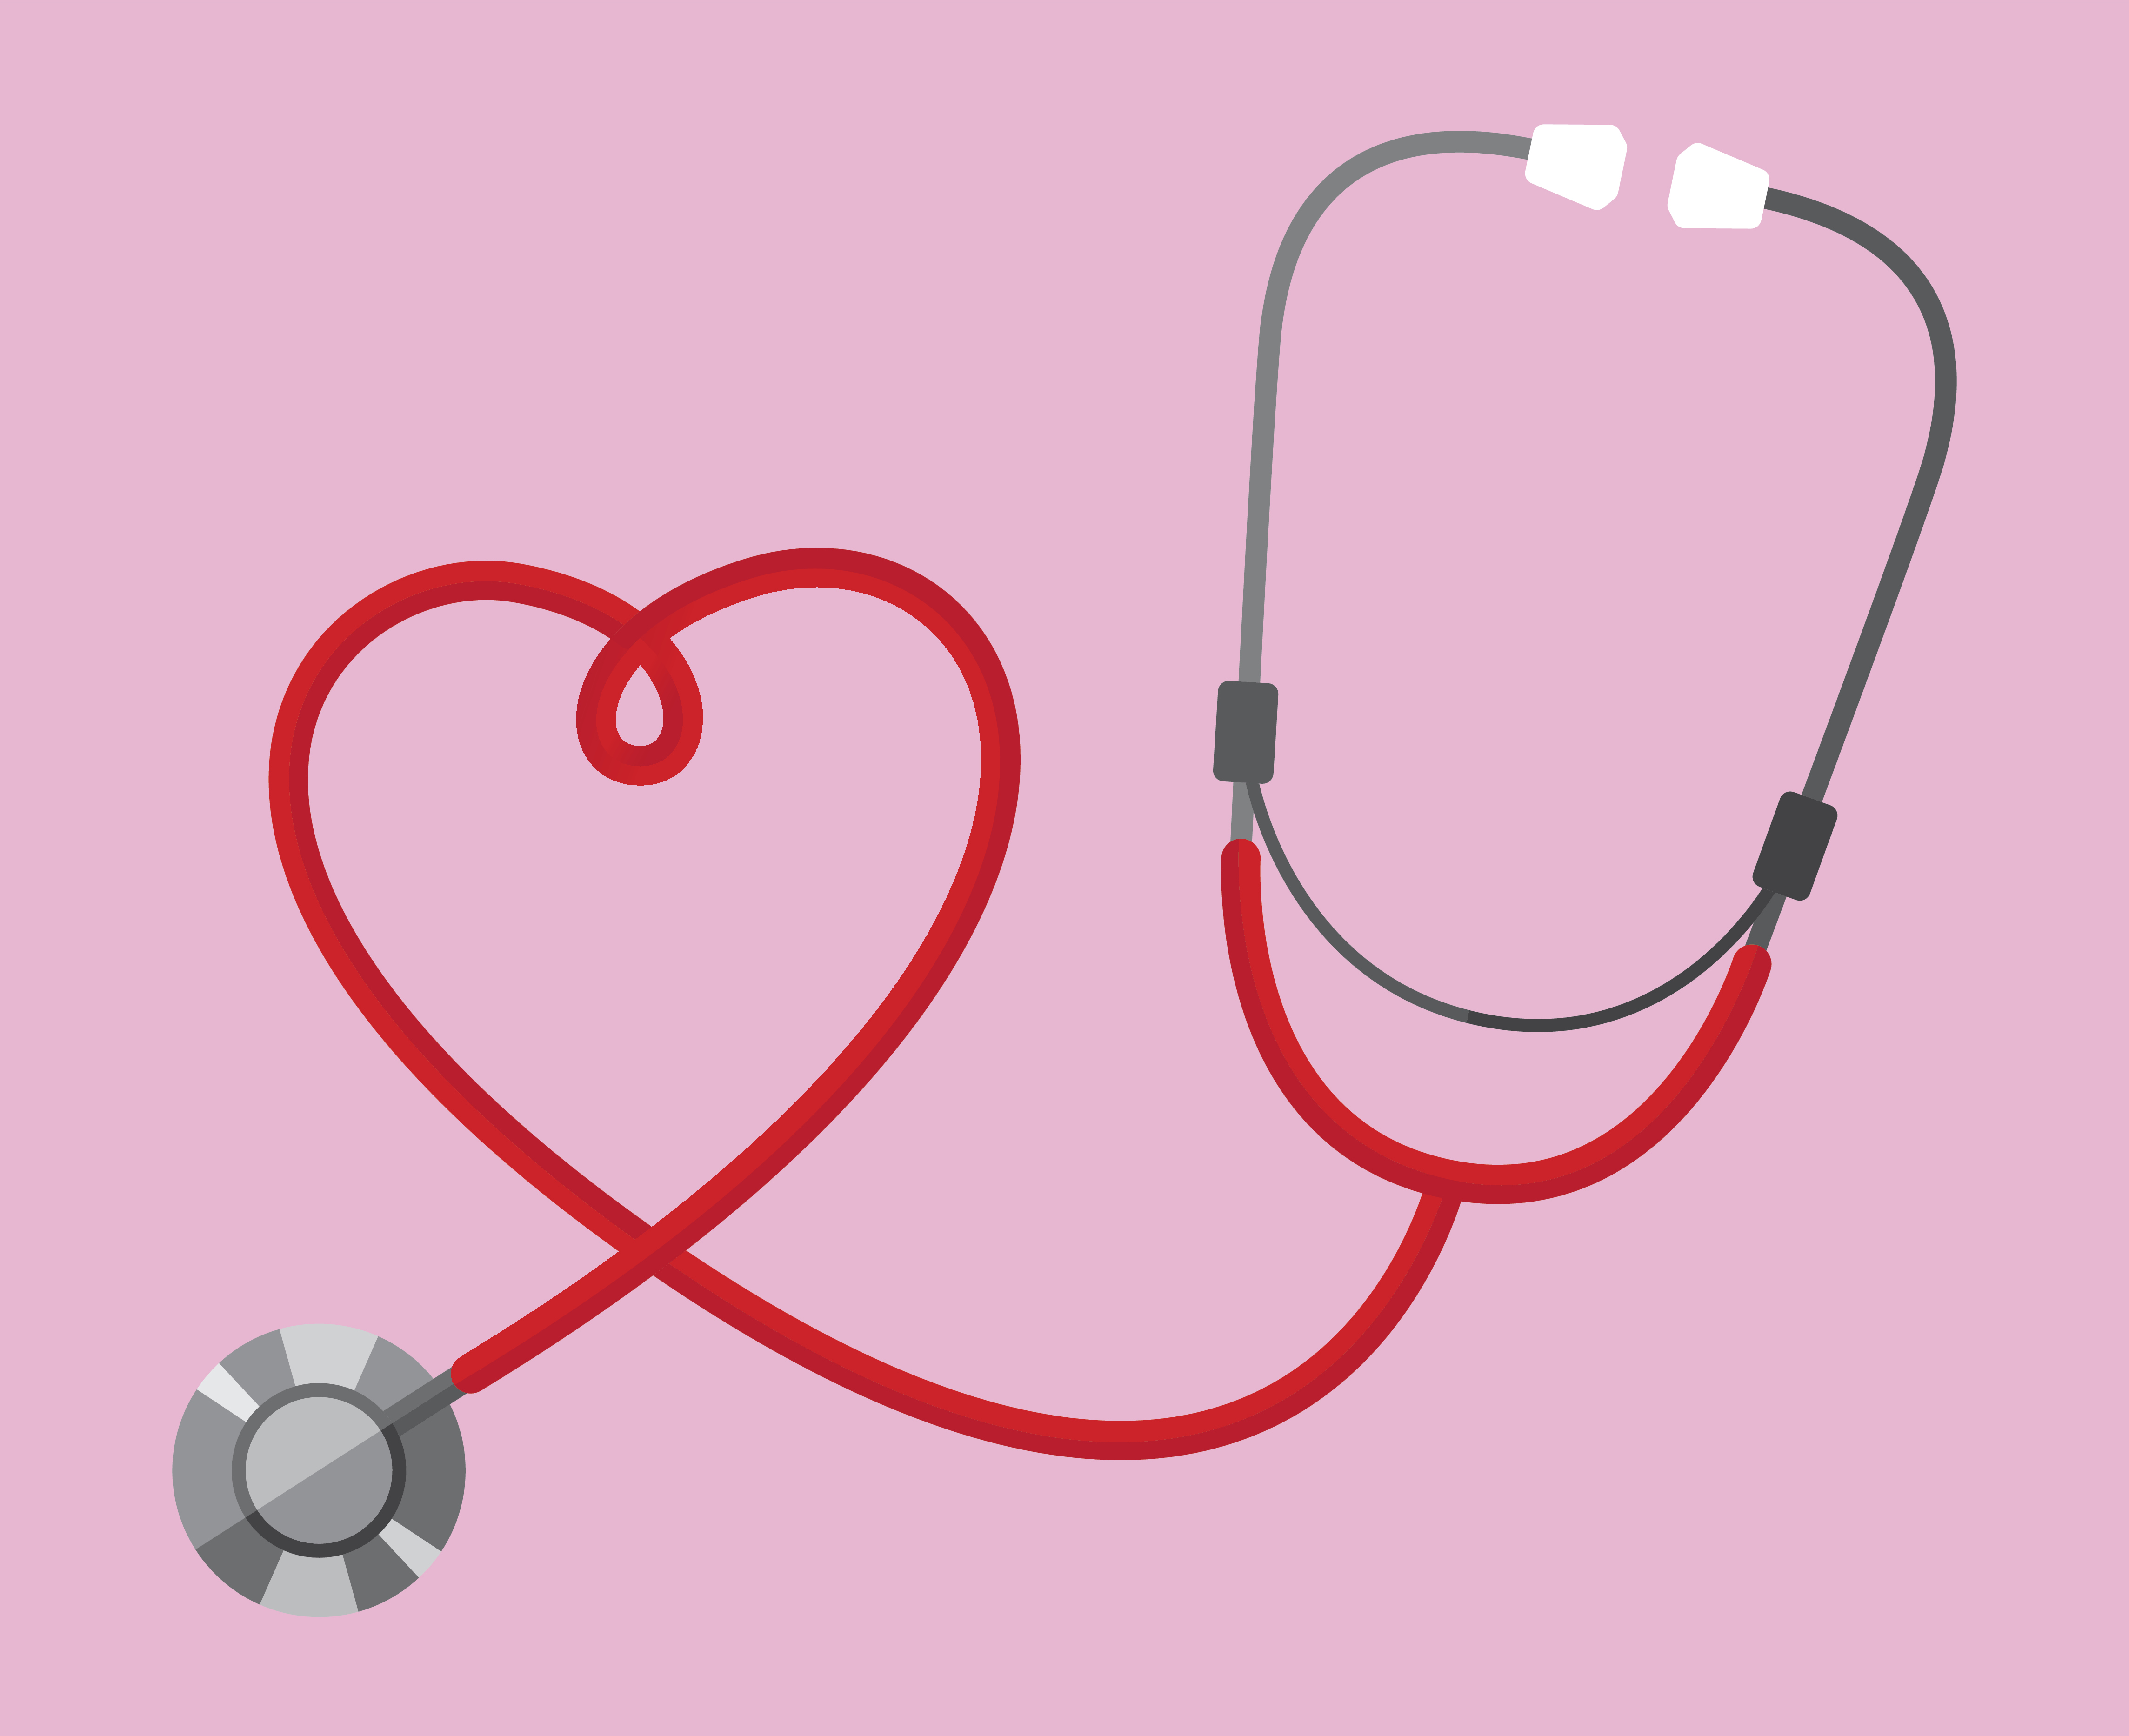 Vector illustration of a stethoscope twisted into the shape of a heart on a pink background. (Getty Images)